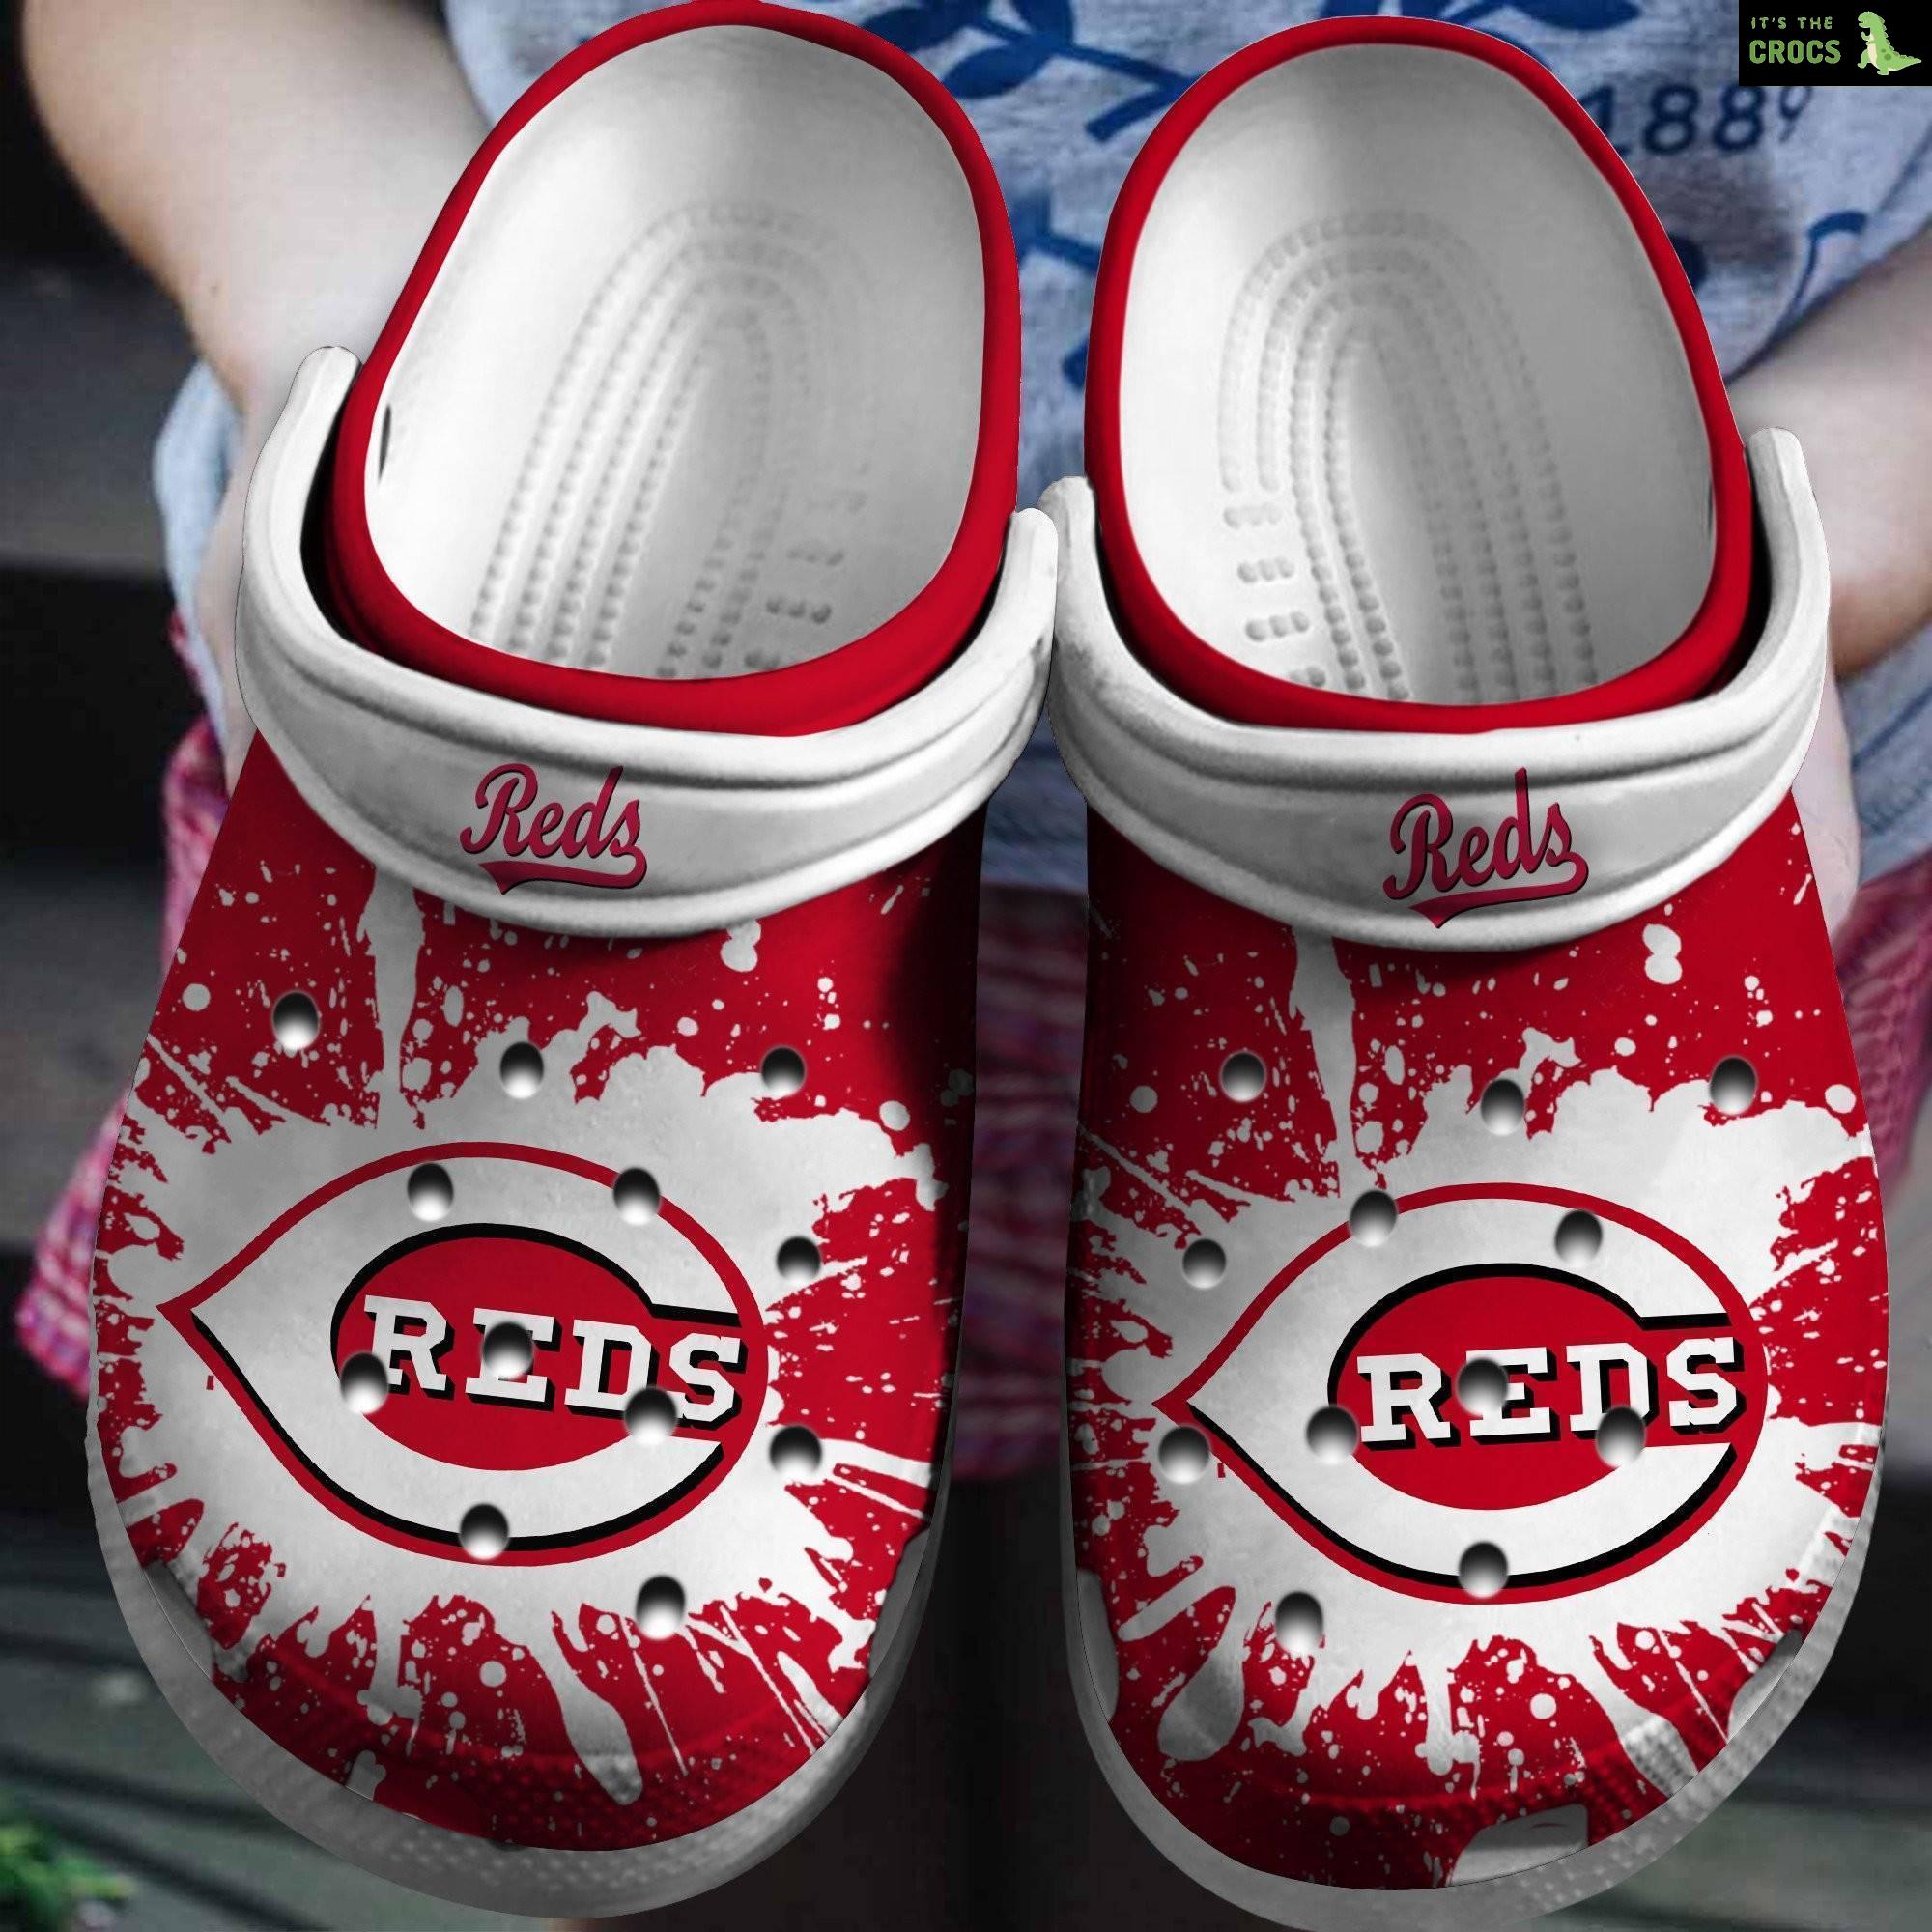 Hot Mlb Team Cincinnati Reds Red – White Crocs Clog Shoesshoes Trusted Shopping Online In The World